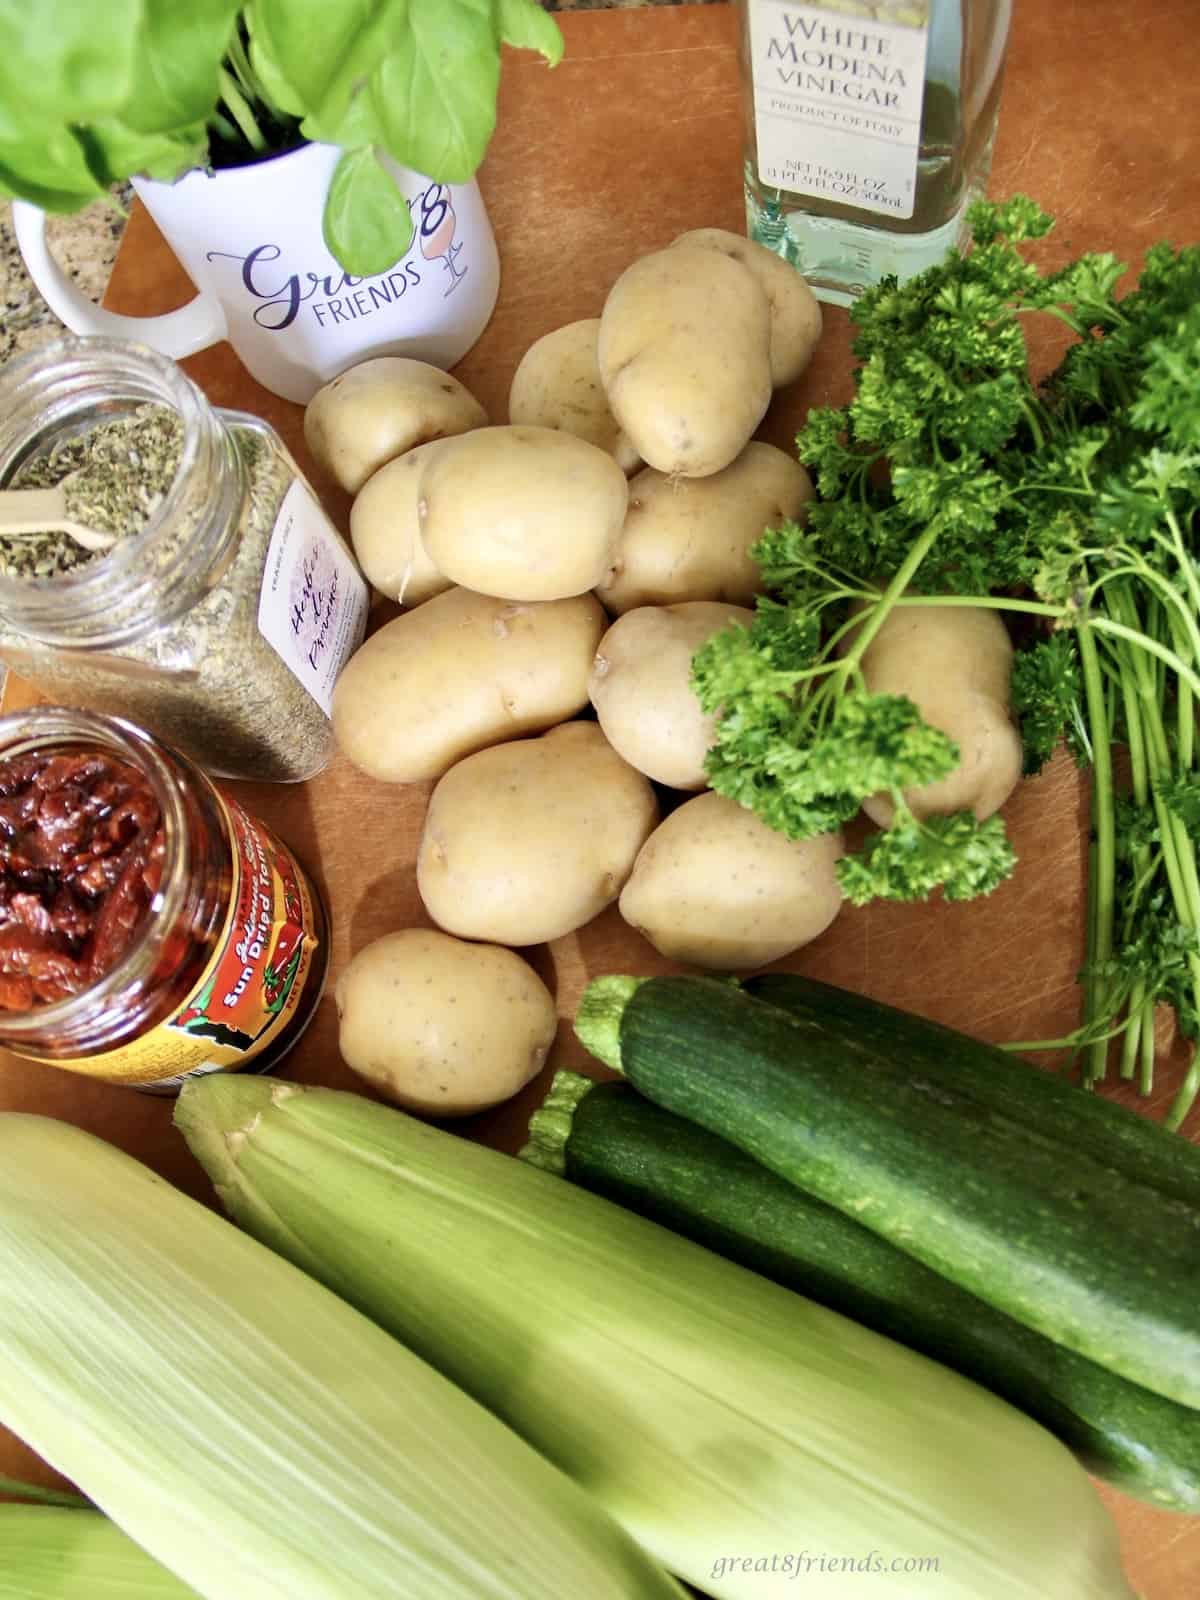 Overhead view of the ingredients in a salad including potatoes, zucchini, corn in the husk, basil, parsley, herbs de Provence, sun-dried tomatoes and vinegar.